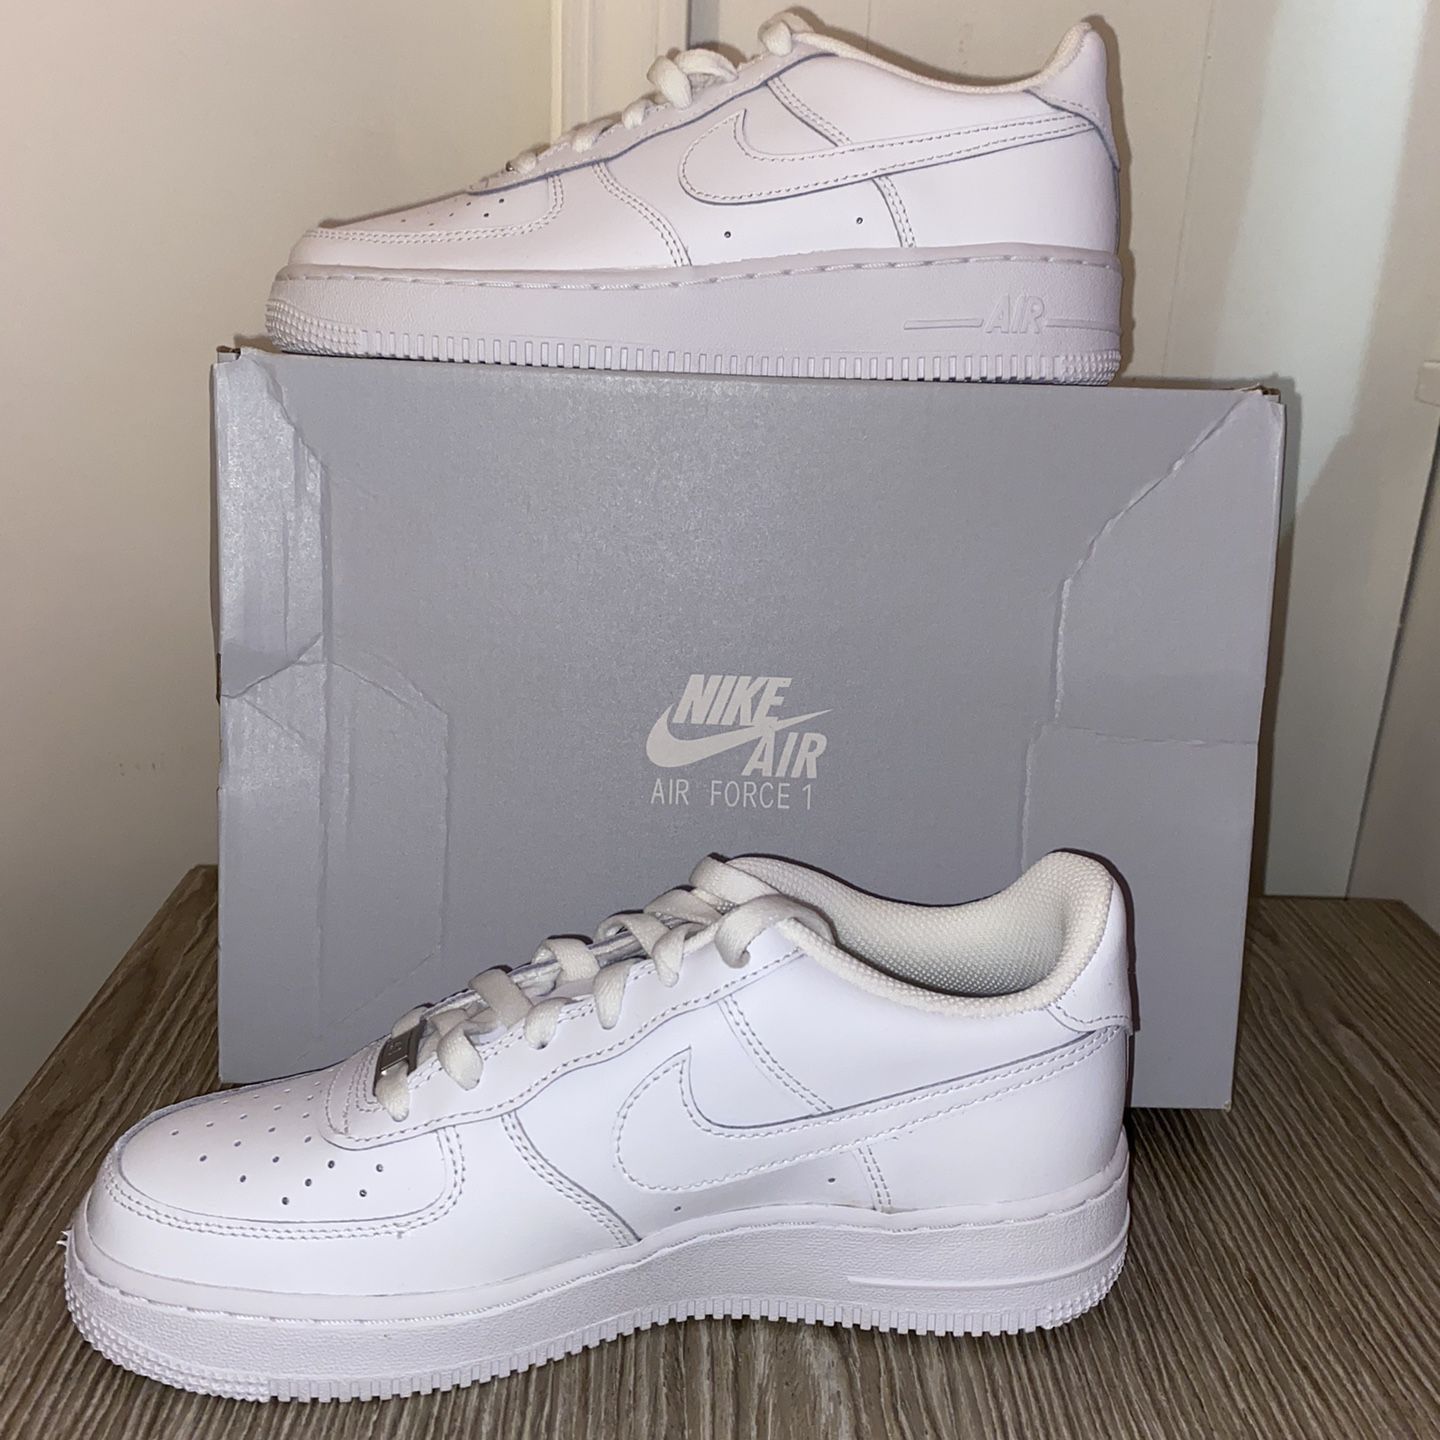 Nike Air Force 1 (White, Low Top,)